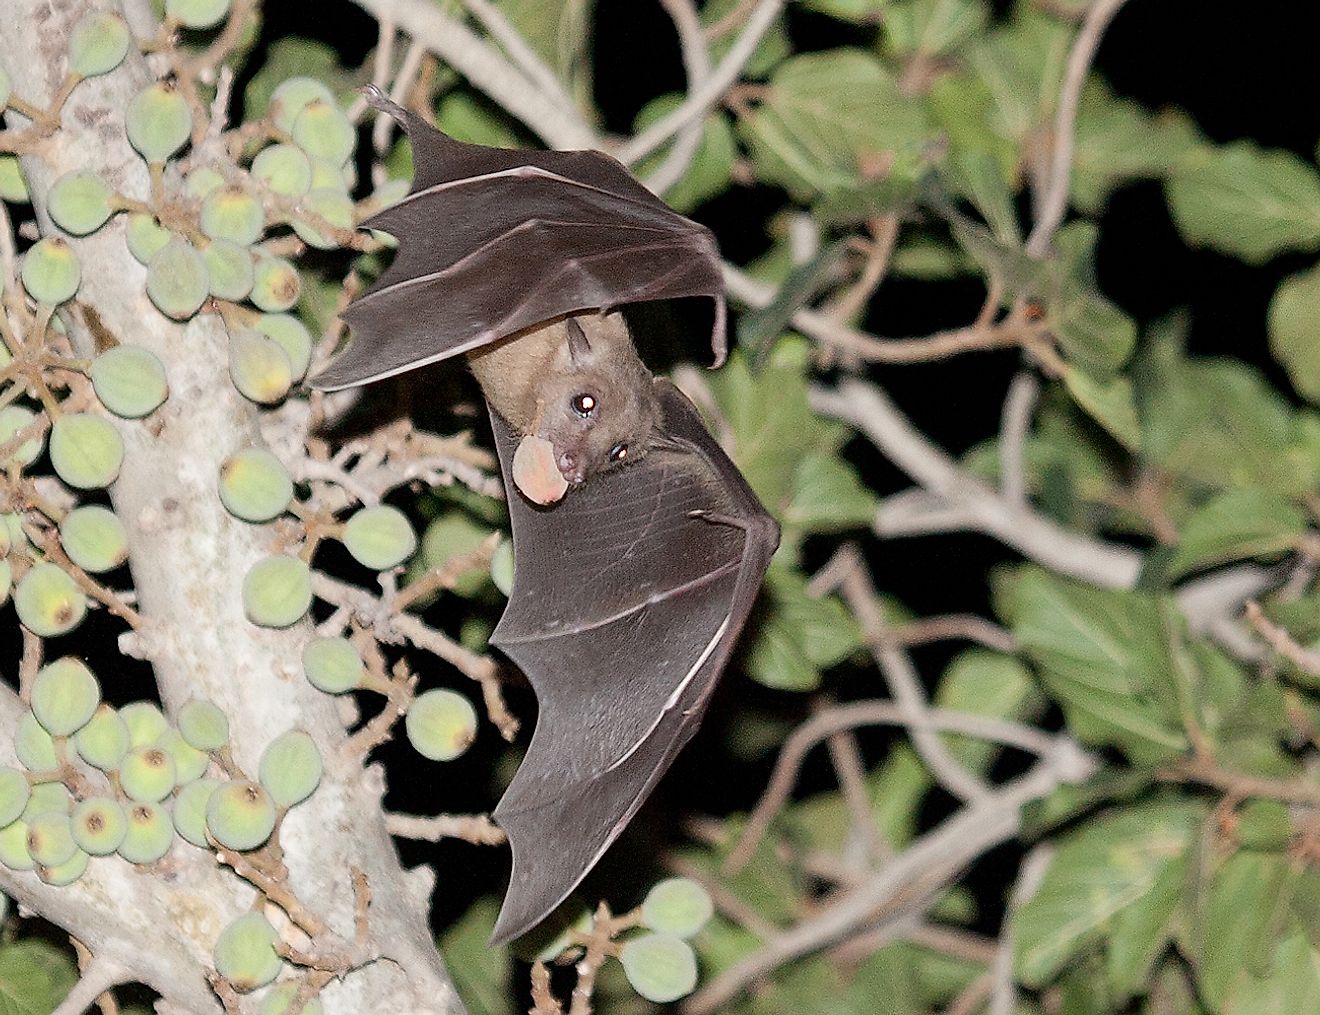 Bats can make cute pets but it is best to leave them in their wild natural habitat. Image credit: Вых Пыхманн/Wikimedia.org